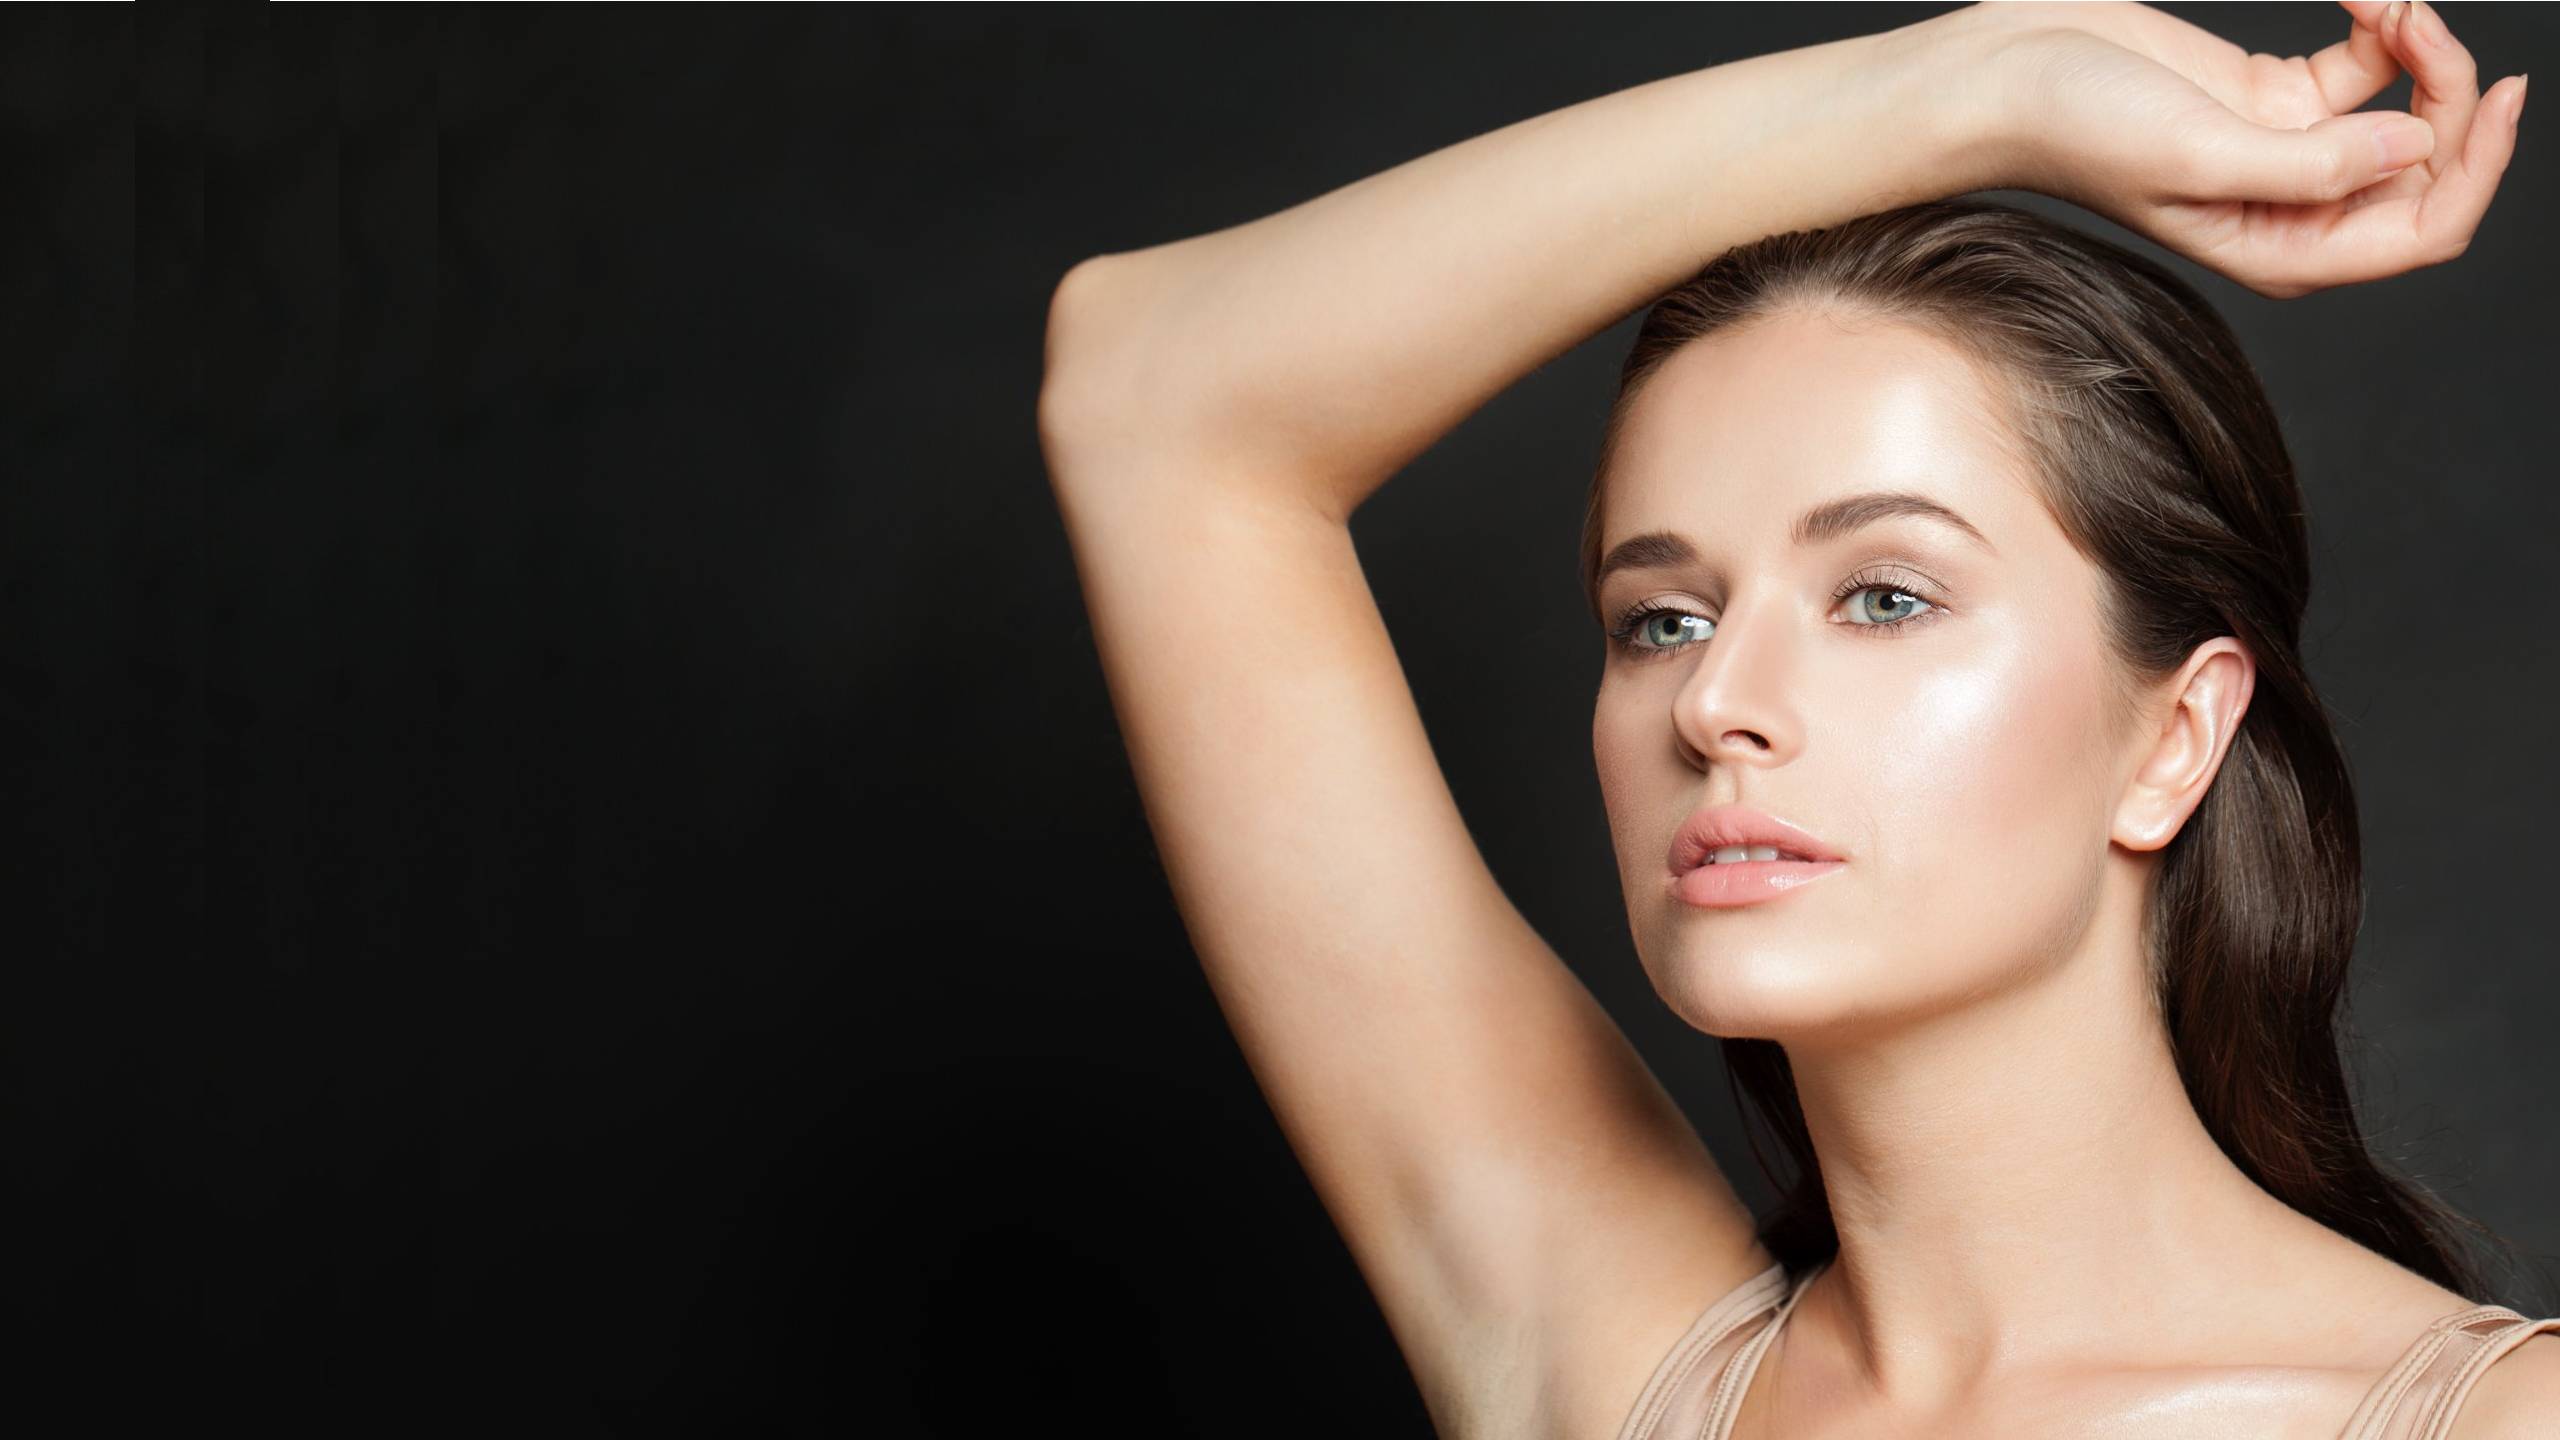 Beautiful woman with flawless skin rests raises her arm above her head and models skin rejuvenation treatments in Virginia.